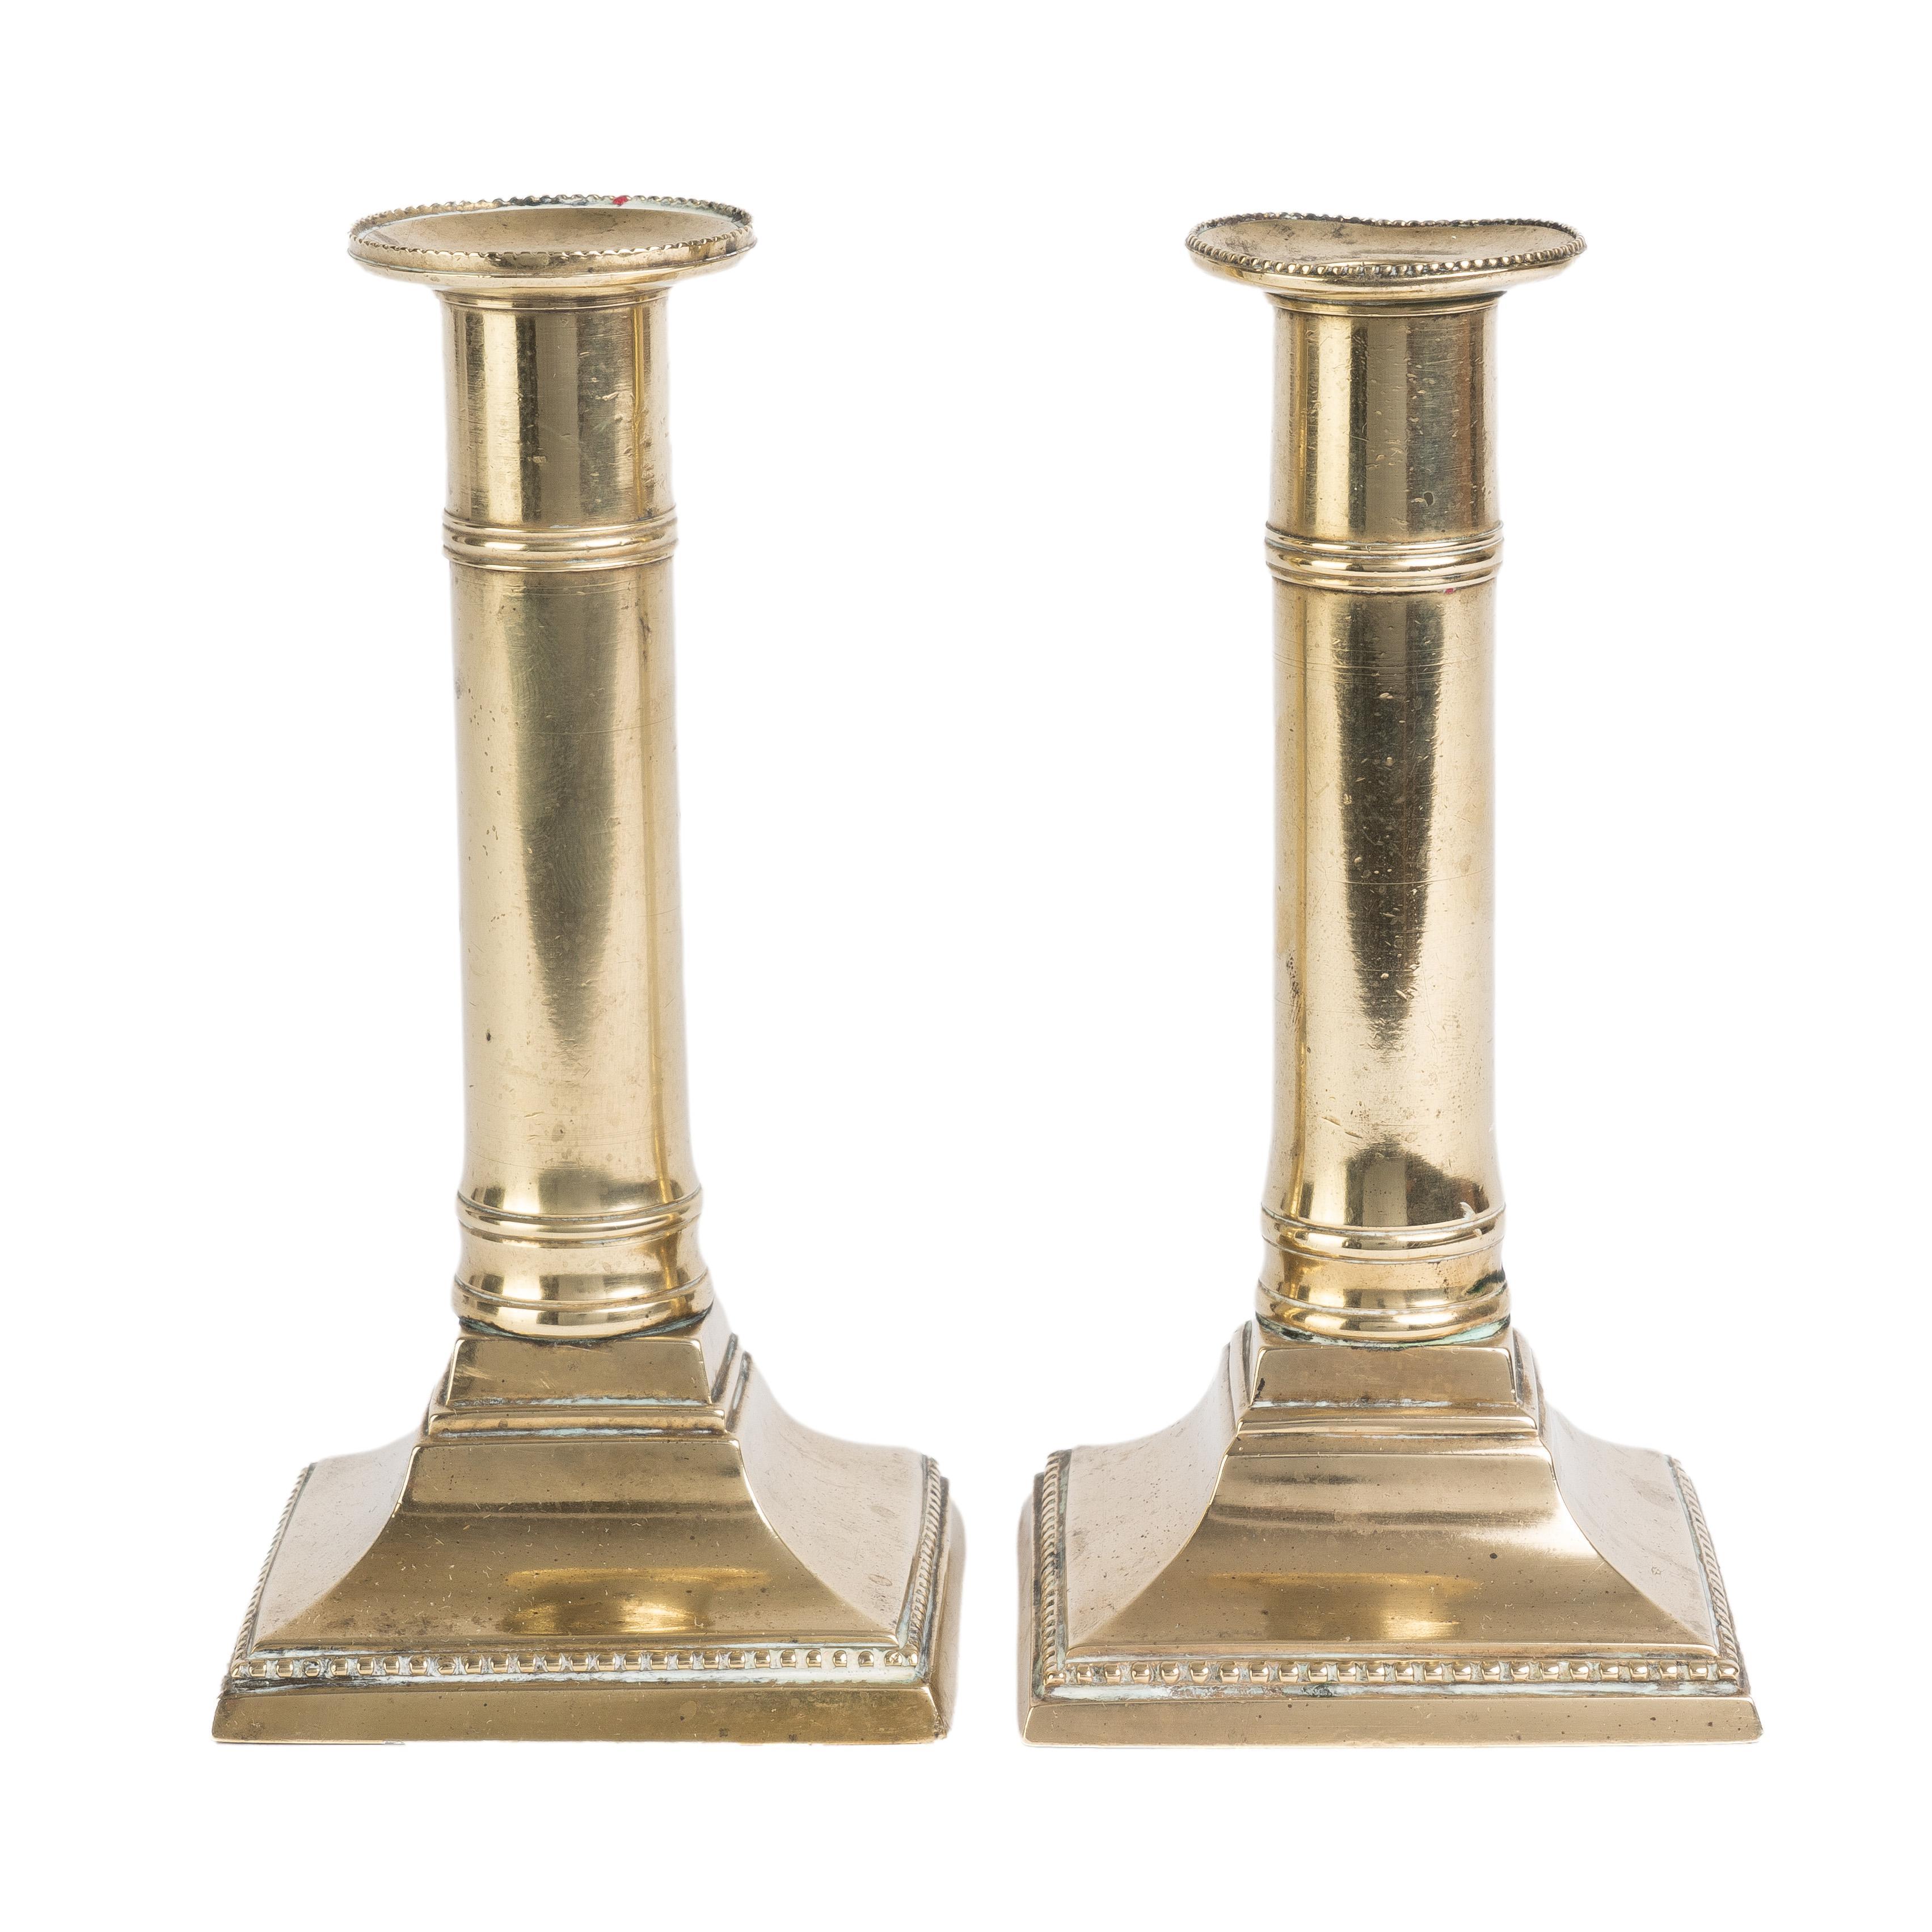 Pair of cast brass columnar candlesticks on a square base fitted with an internal push up candle ejector. Both the bobesh rim and the base are decorated with a finely beaded border.

England, circa 1810.